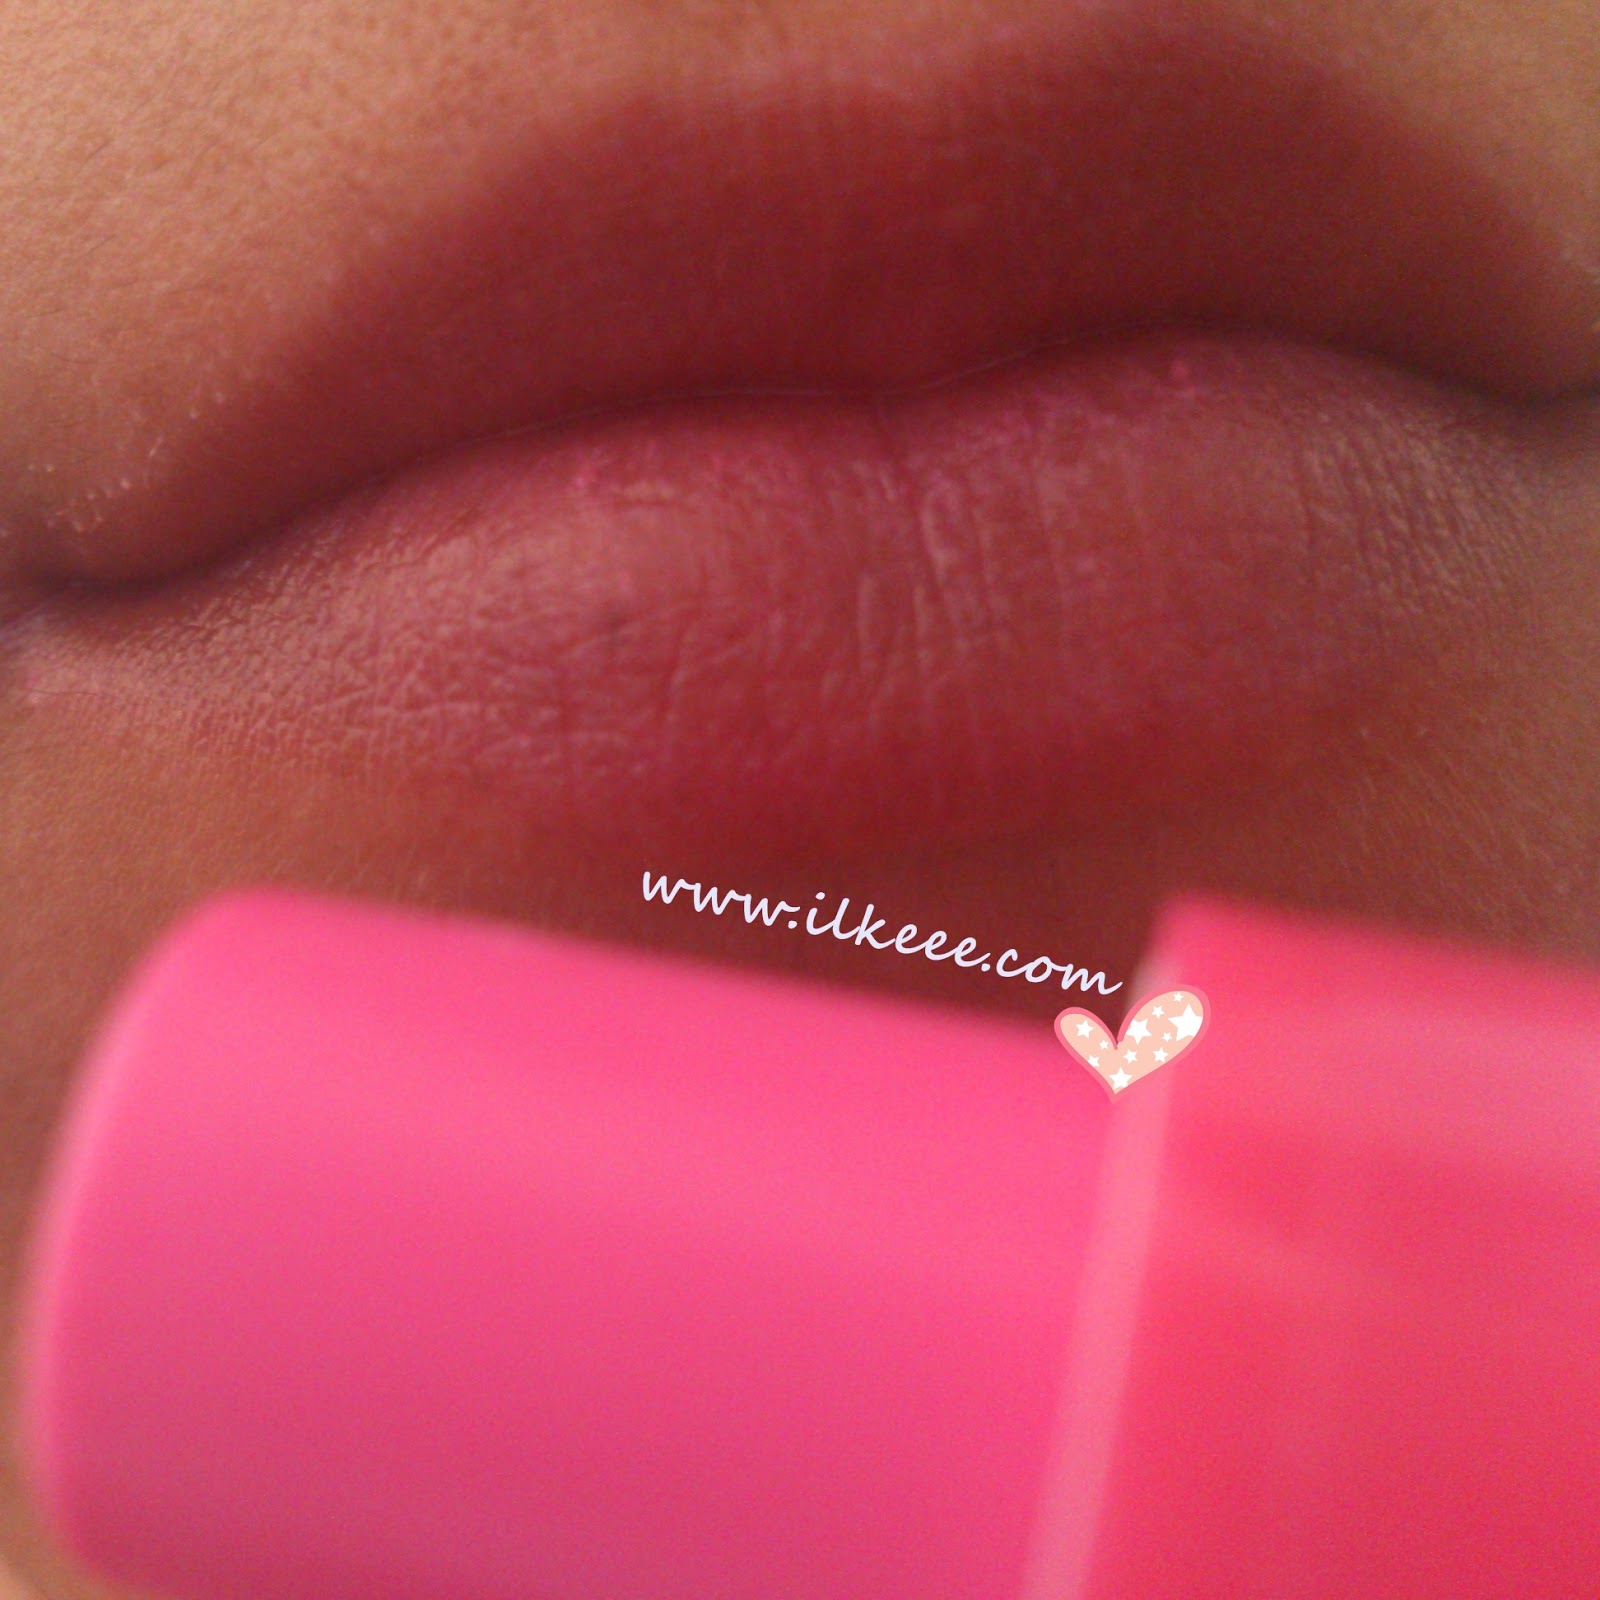 Maybelline - Maybelline Baby Lips Pink Punch - Baby Lips kullananlar - Baby Lips - baby lips swatches